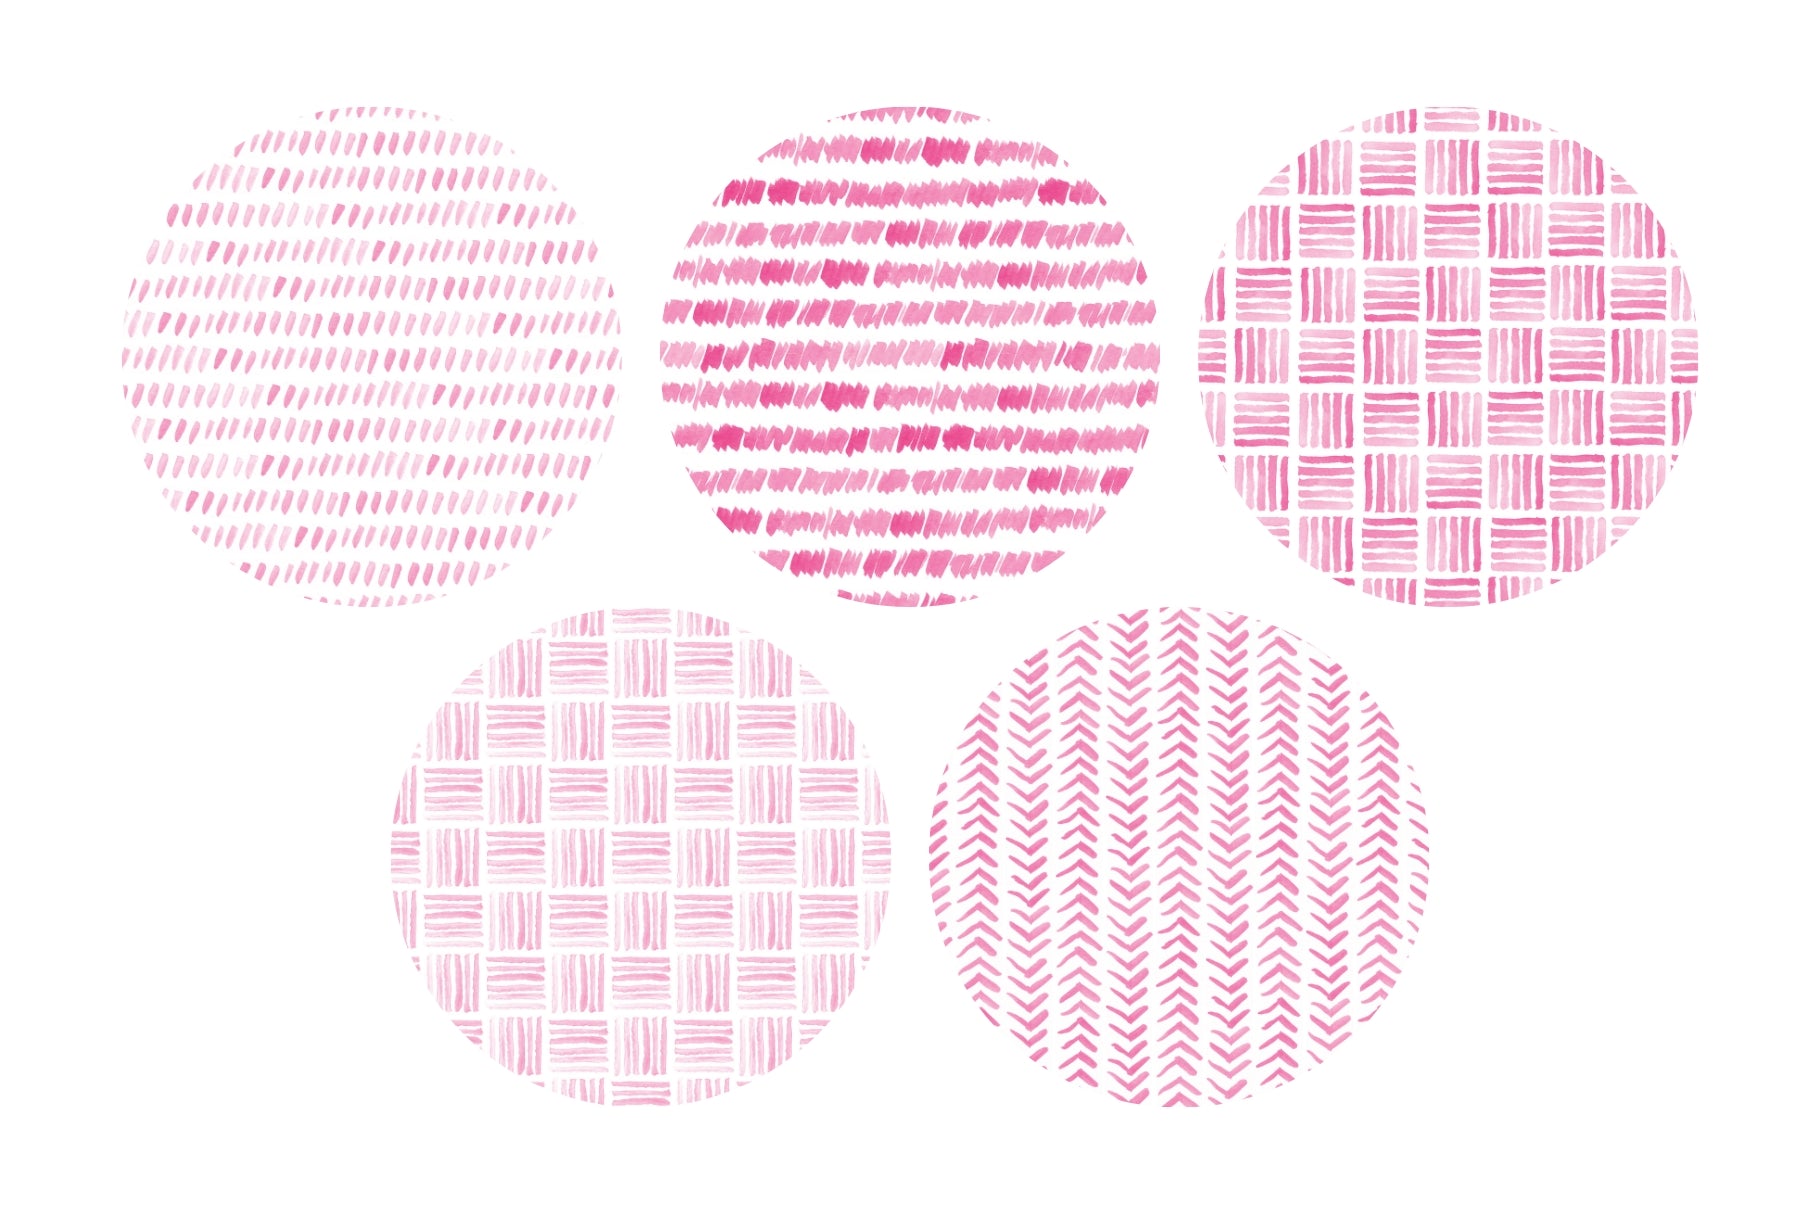 Watercolor Patterns 01 Pink Watercolor Seamless Patterns